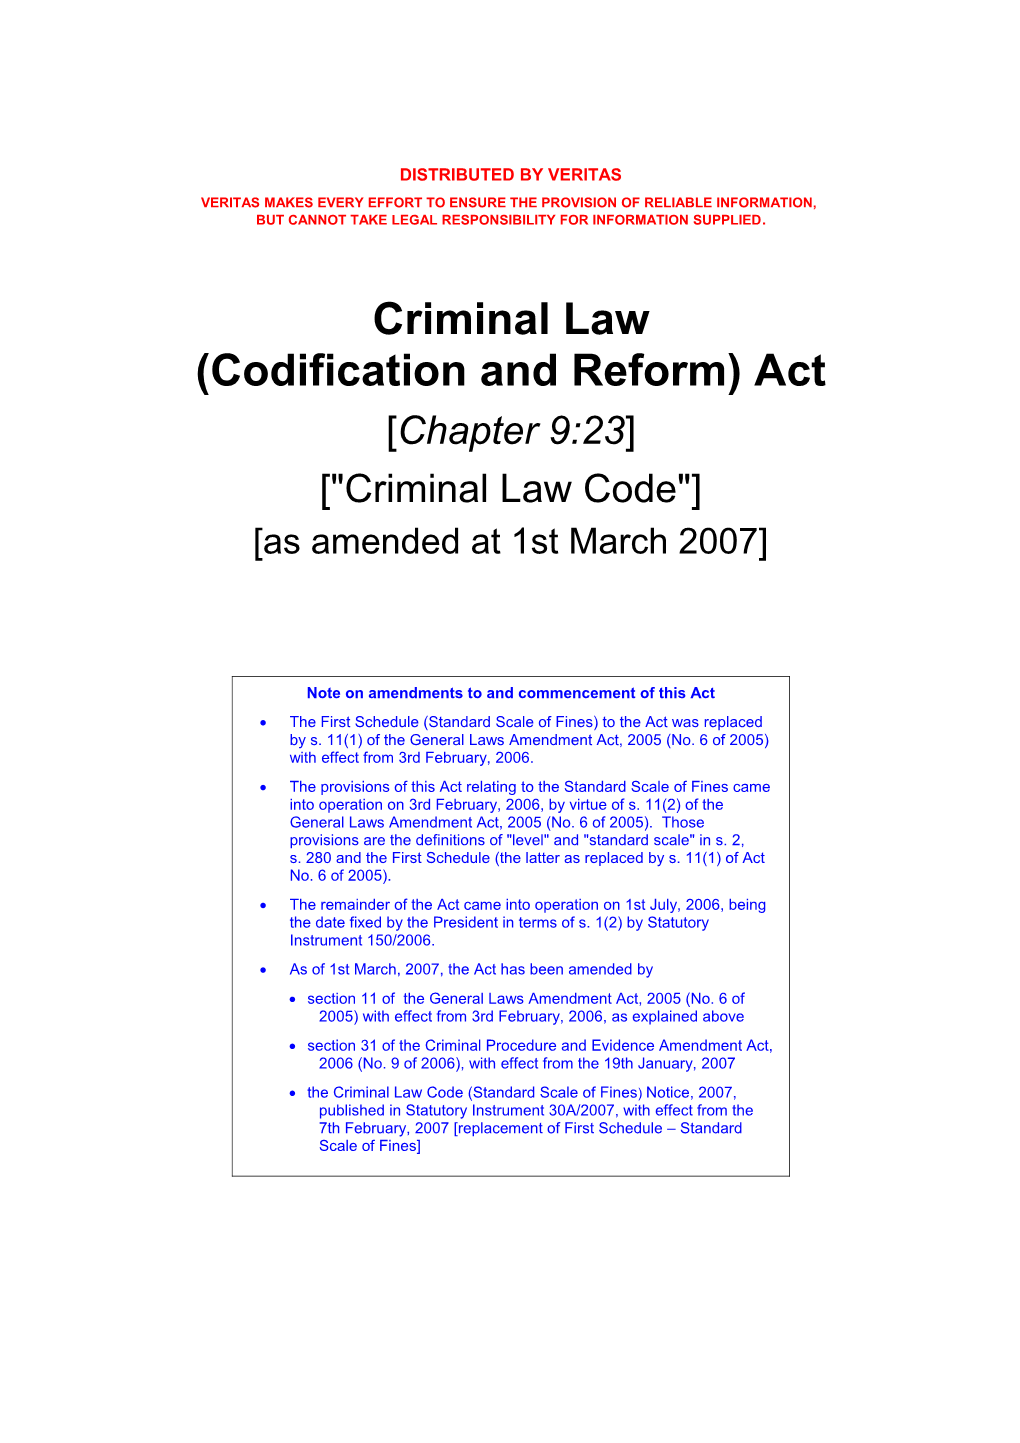 Criminal Law (Codification and Reform) Act 23/2004